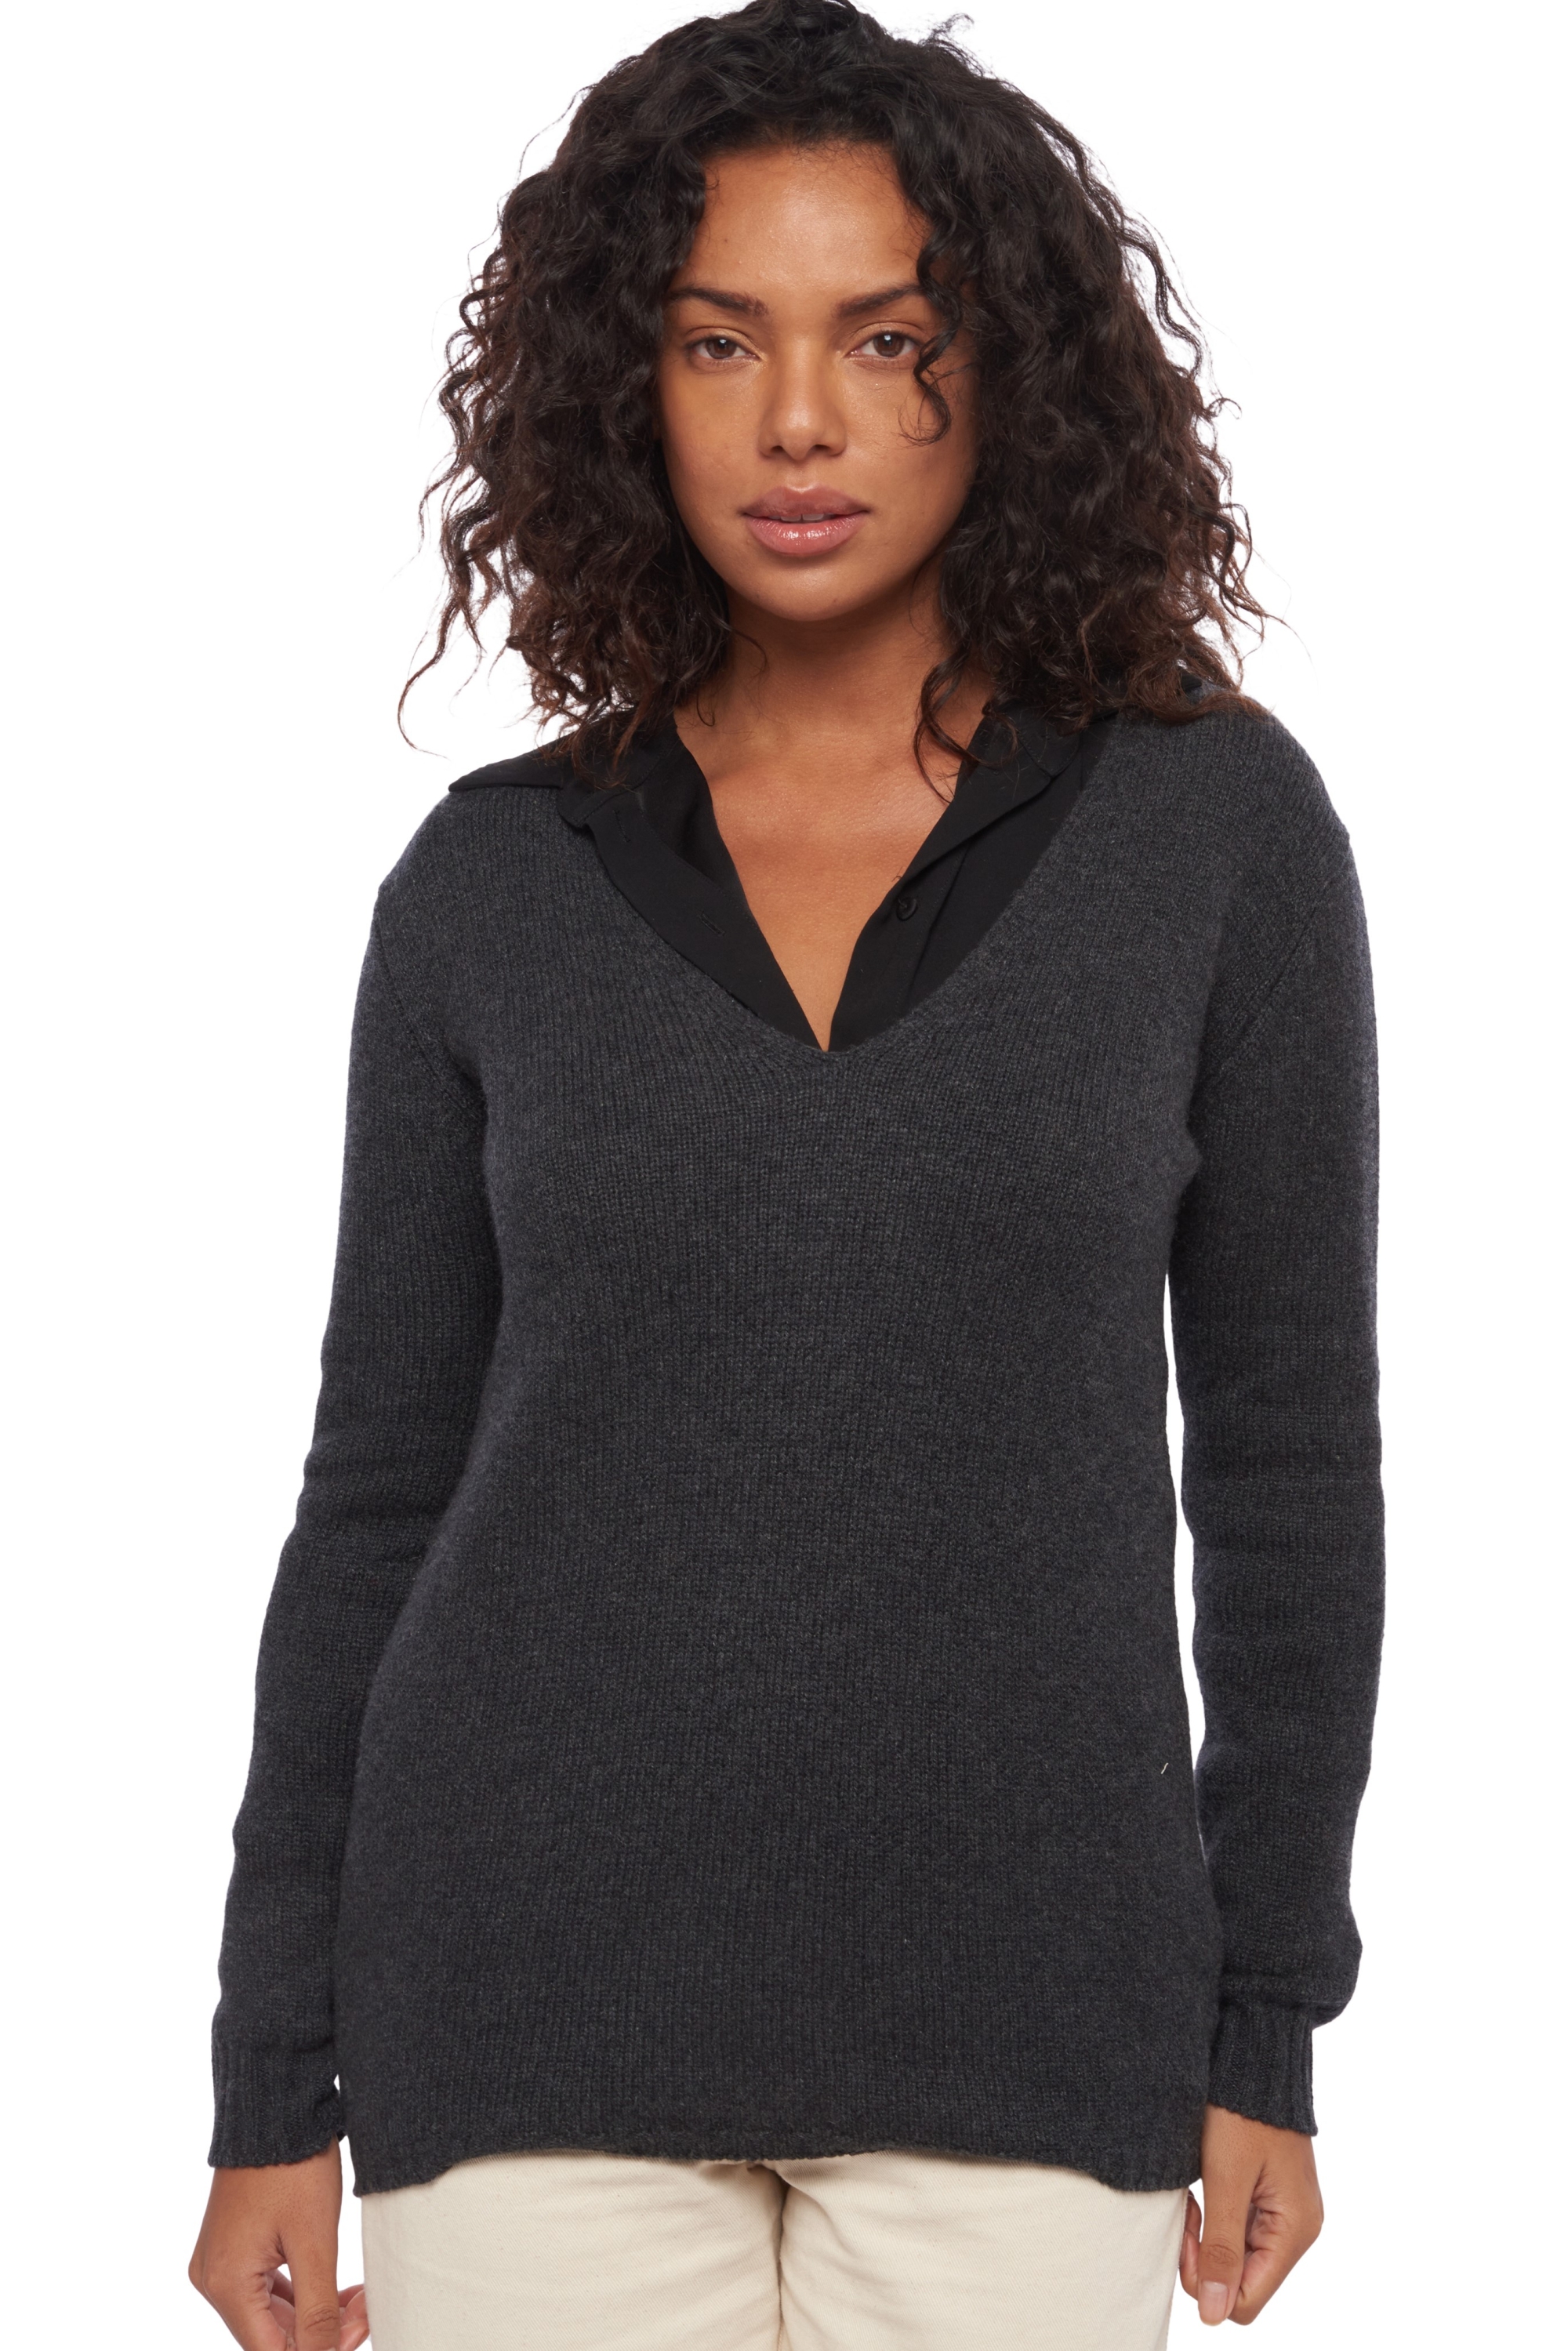 Cashmere ladies chunky sweater vanessa charcoal marl s